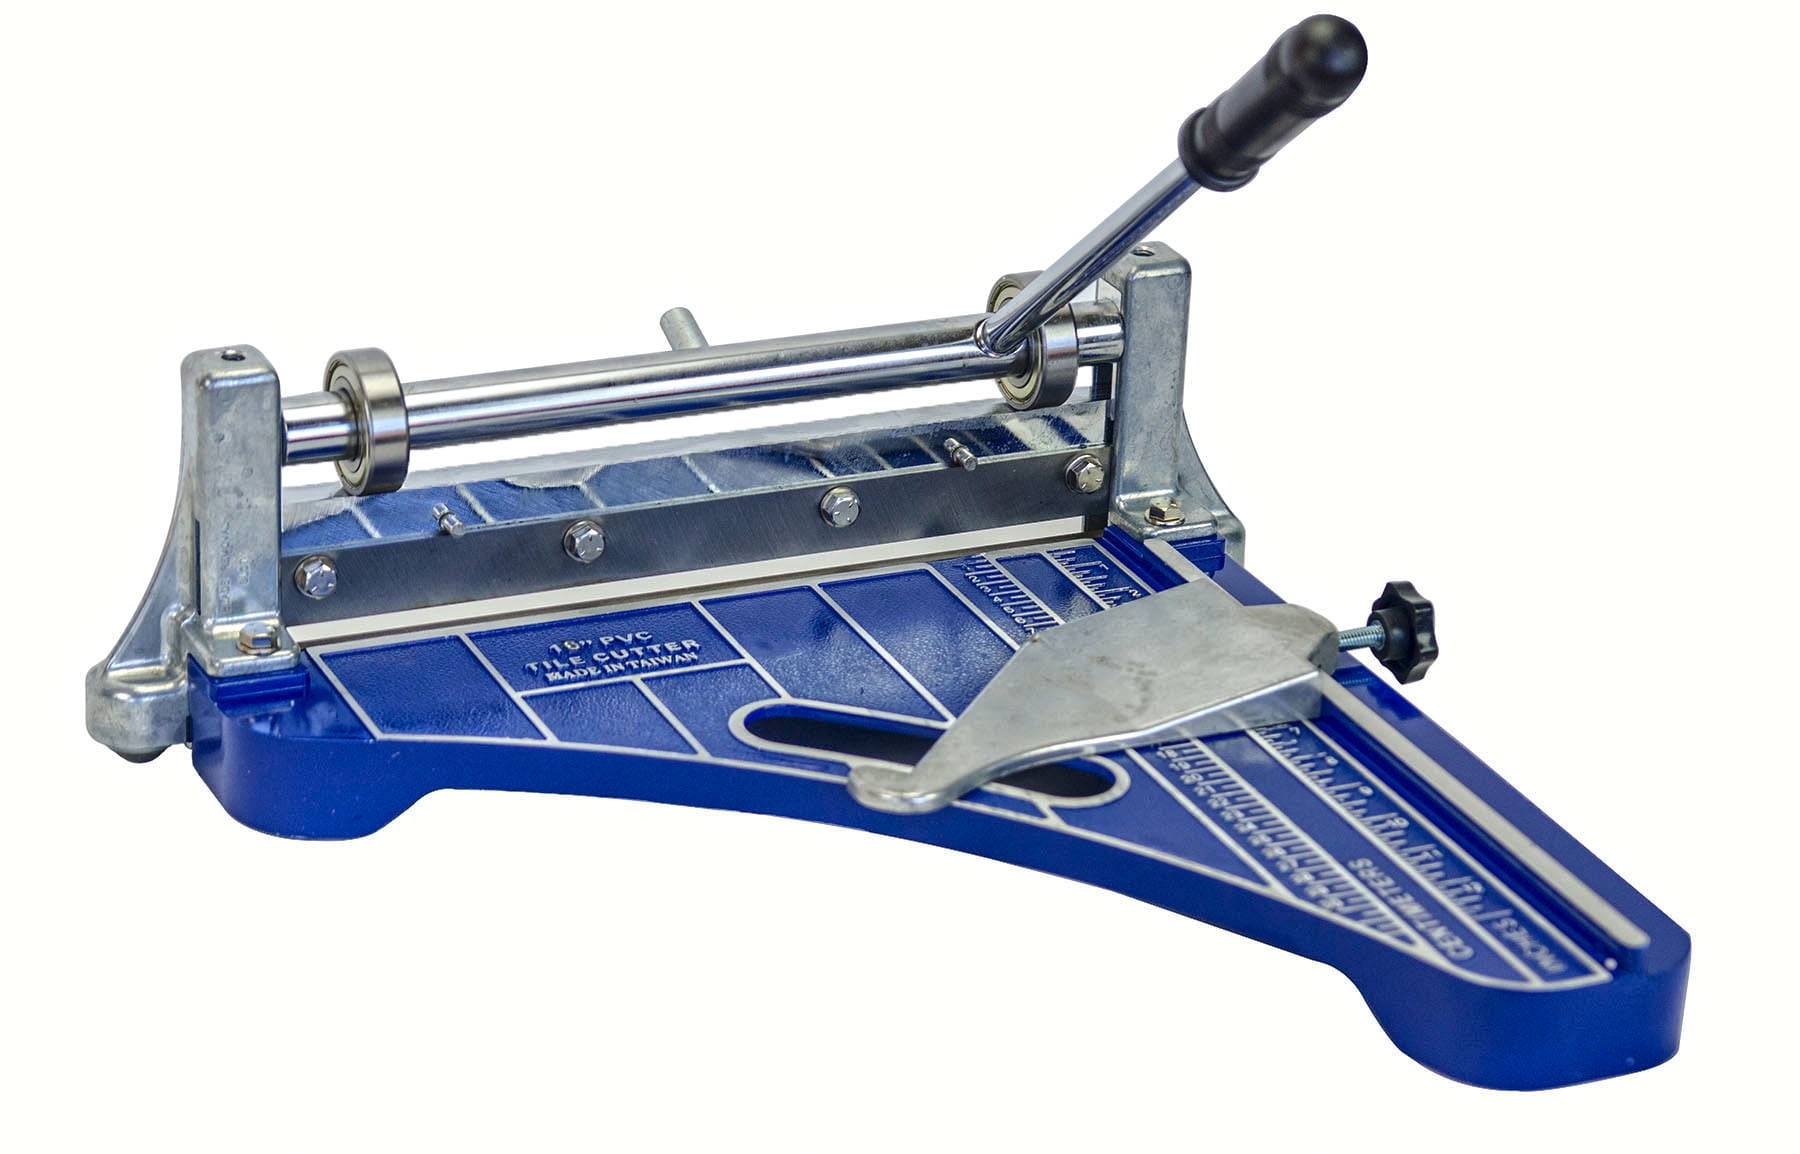 Tile Cutter Hand Tool 36 inch Large Manual Ceramic Floor Tile Cutter, All-Aluminum Frame Cutting Machine Precise Tile Cutter Tools w/Alloy Knife Wheel